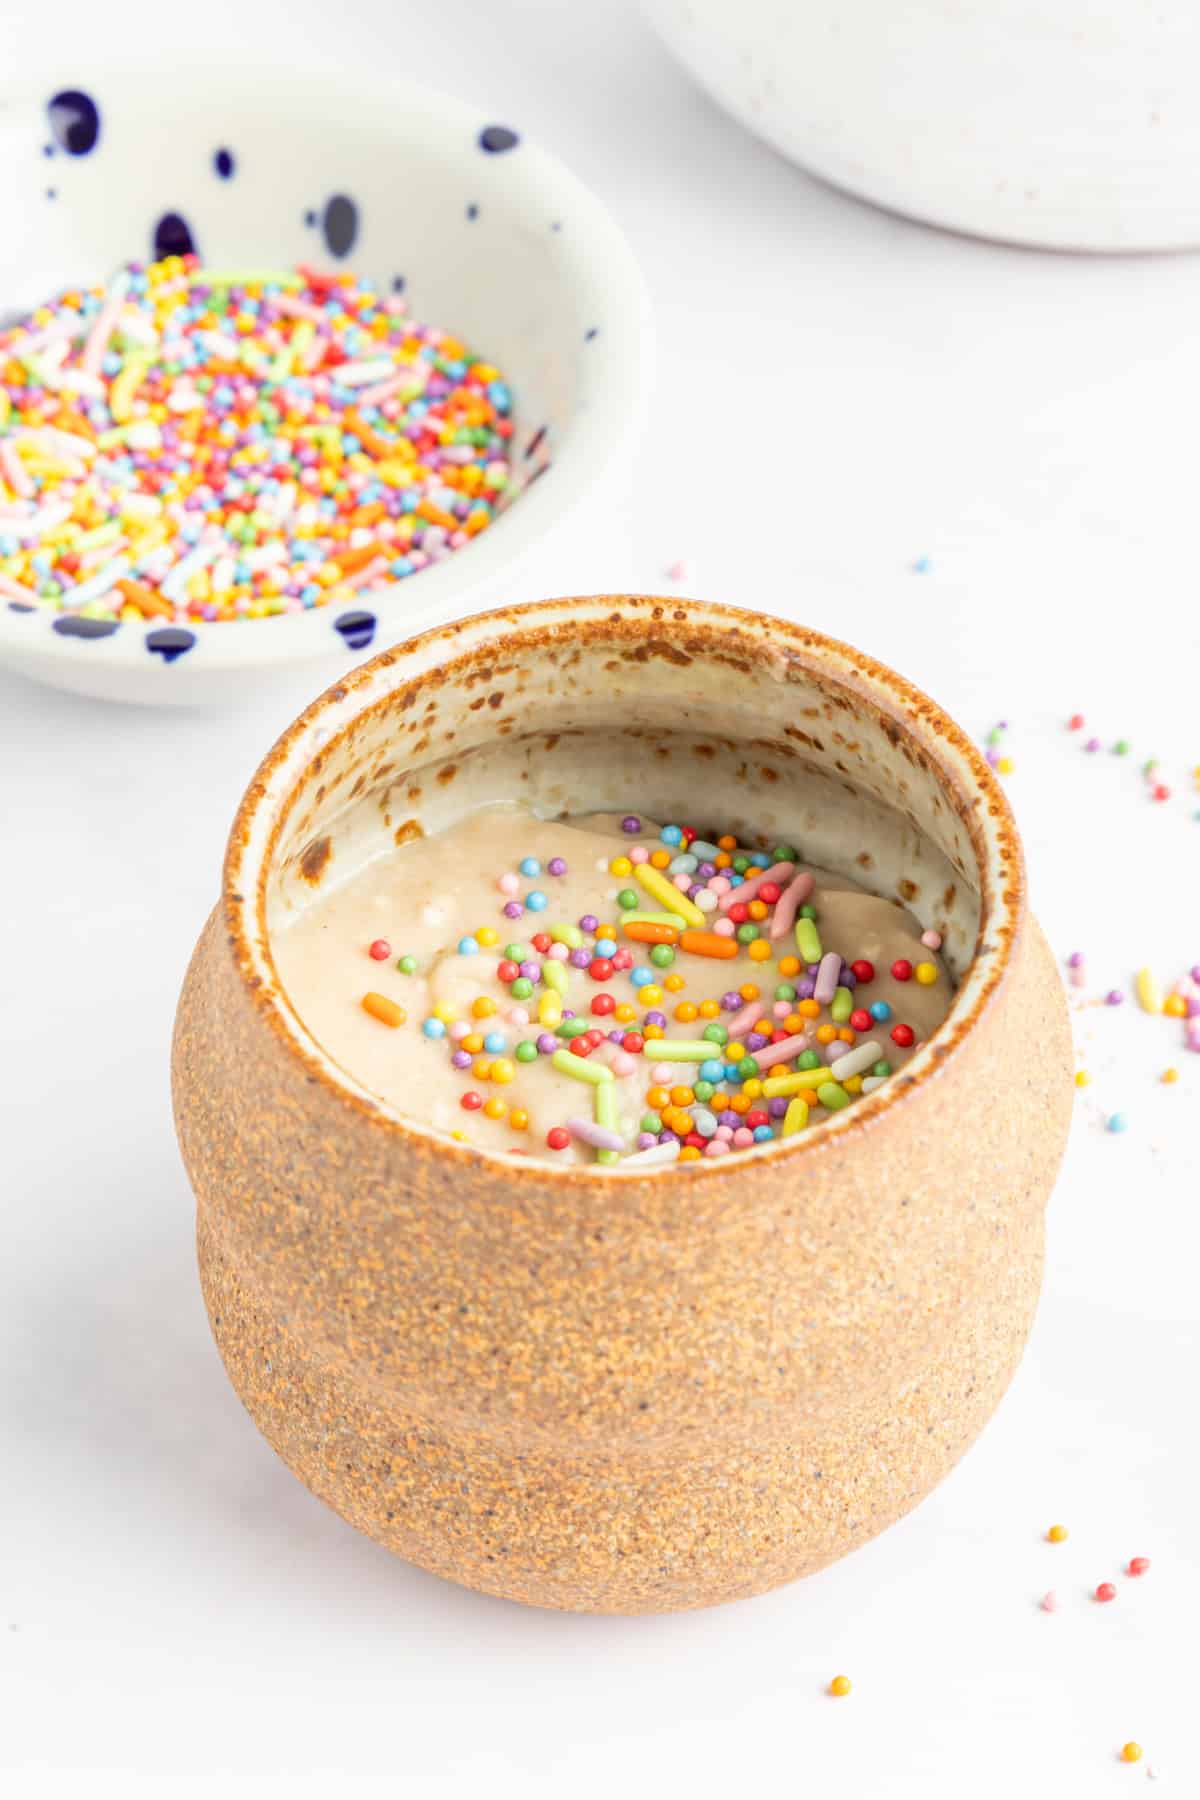 The batter for a minute mug muffin sits in the mug before cooking. Mug is light brown pottery, sitting on a white background next to a small bowl of pastel colored sprinkles.